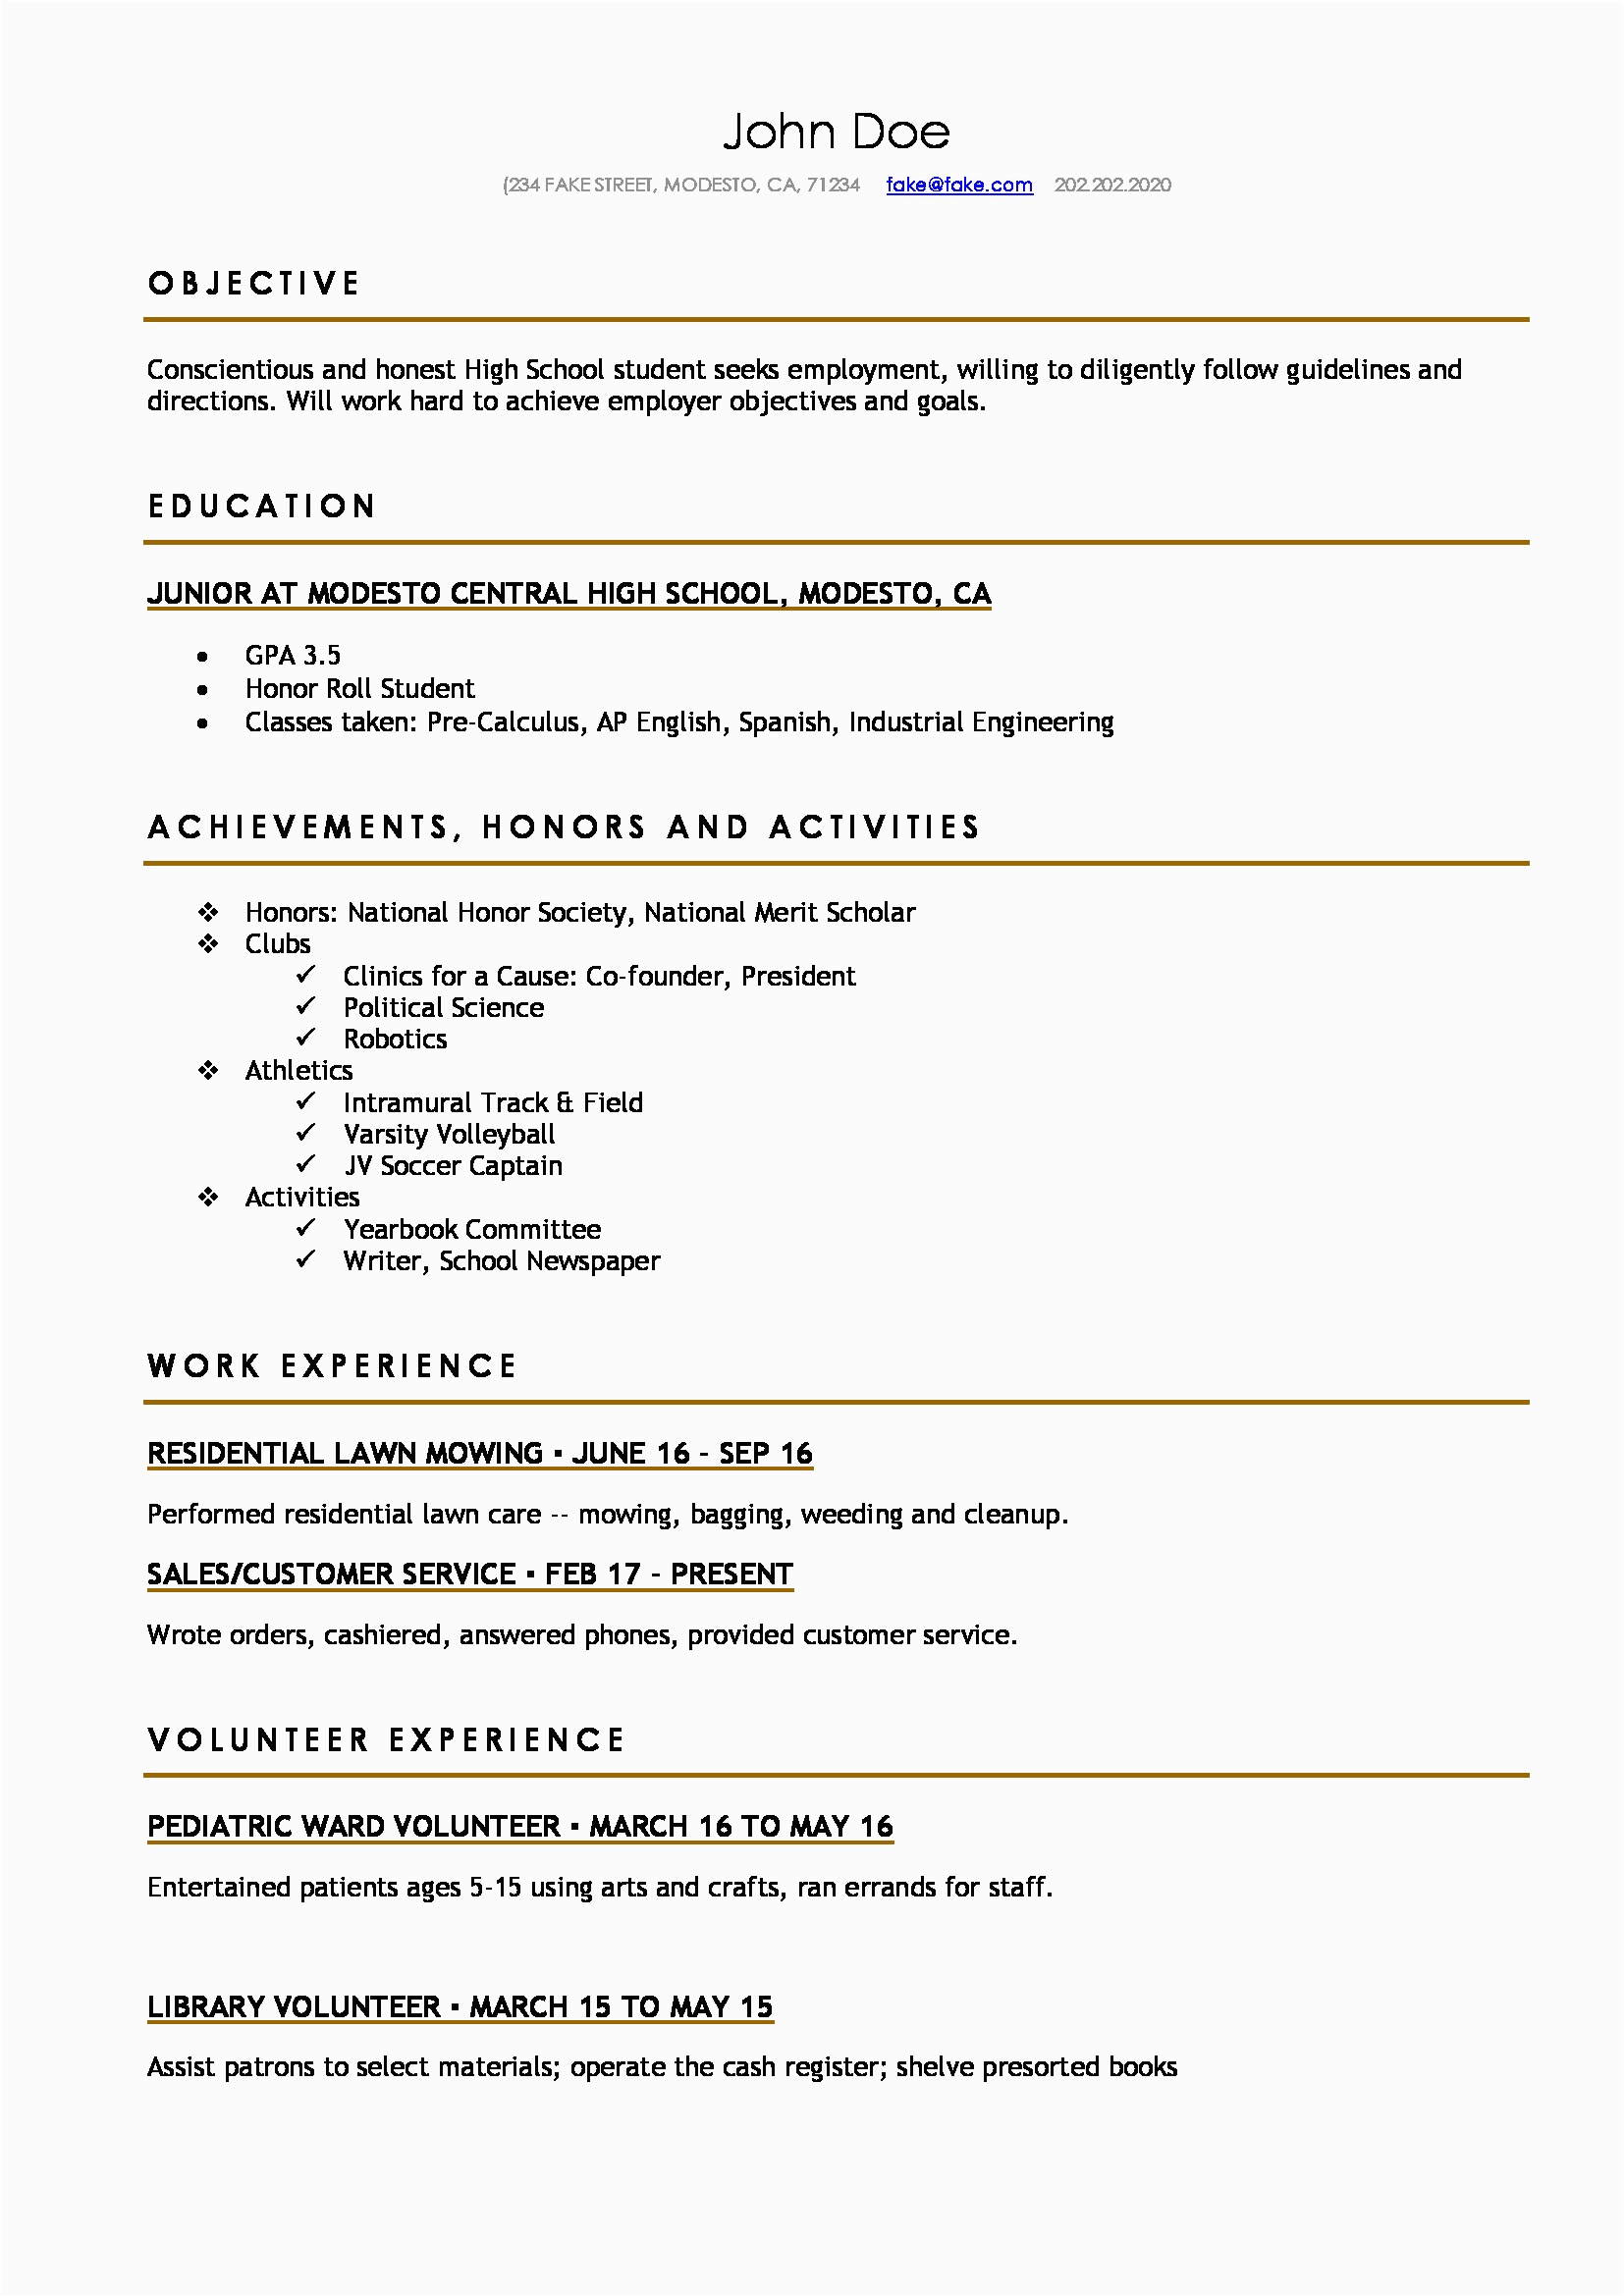 Sample High School Student Resume for College High School Resume Resume Templates for High School